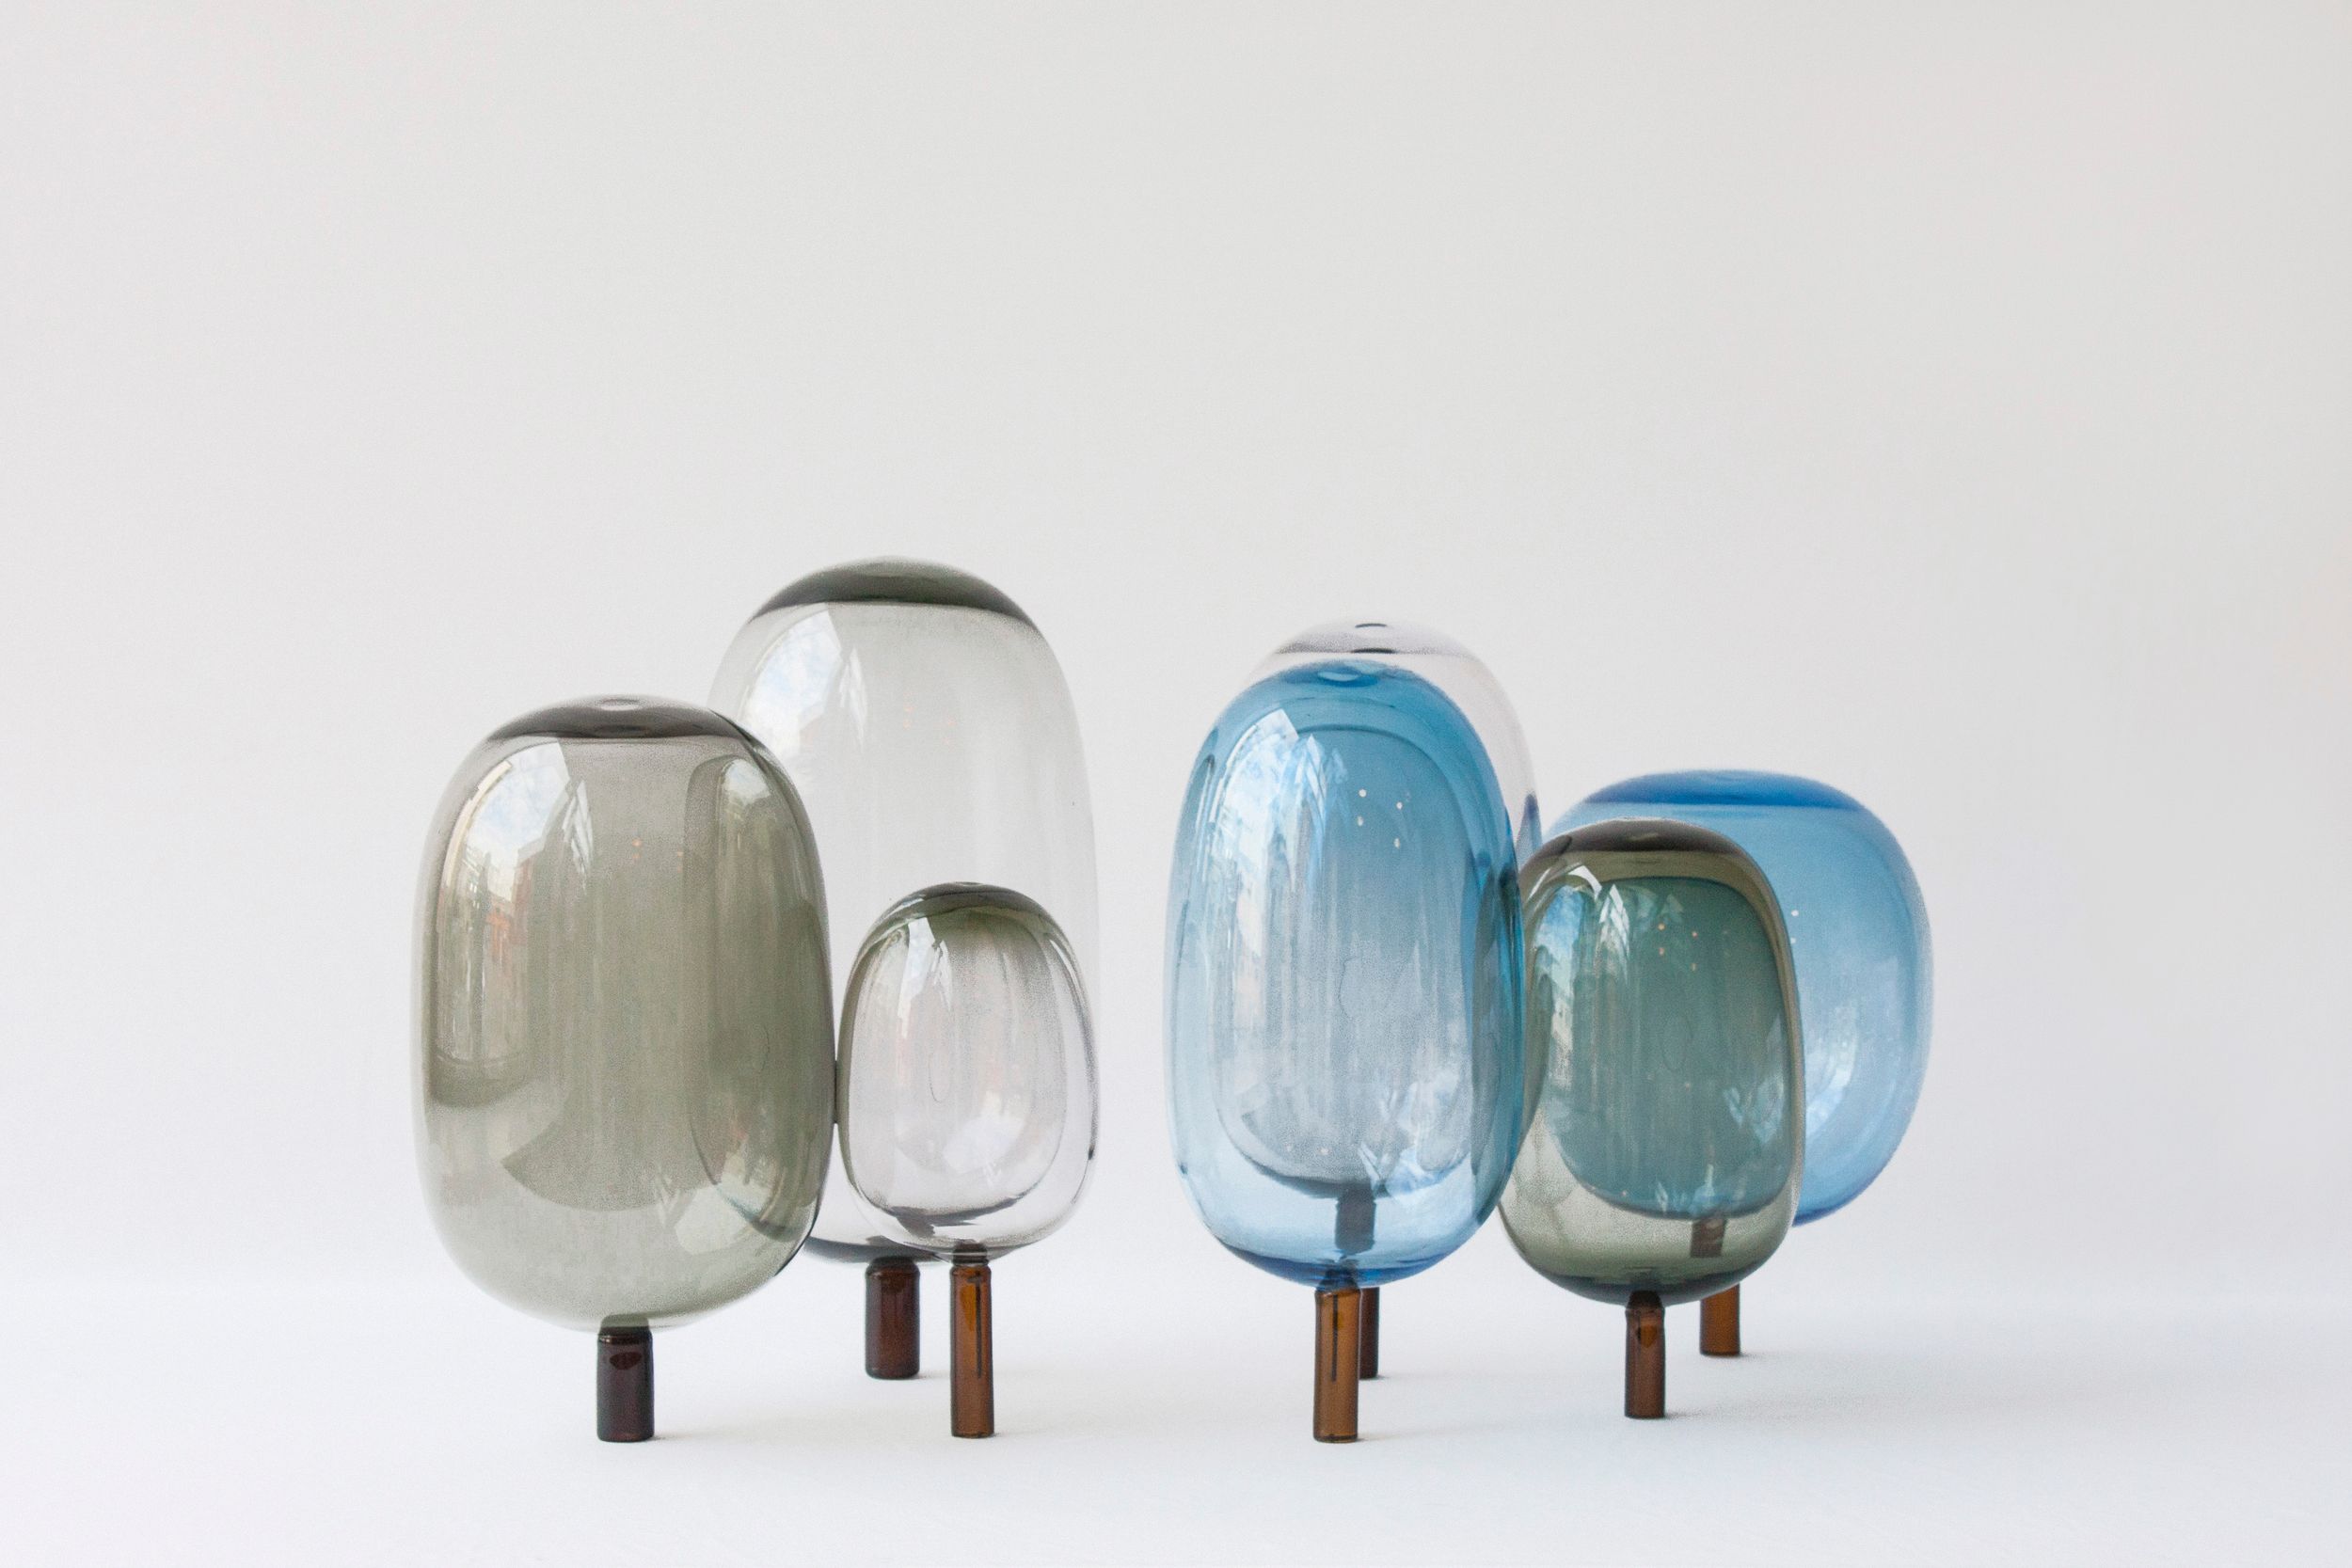 The woods designed by Jonas Stokke, Øystein Austad and Andreas Engesvik, grey and white and blue glass sculptures, mouth blown glass